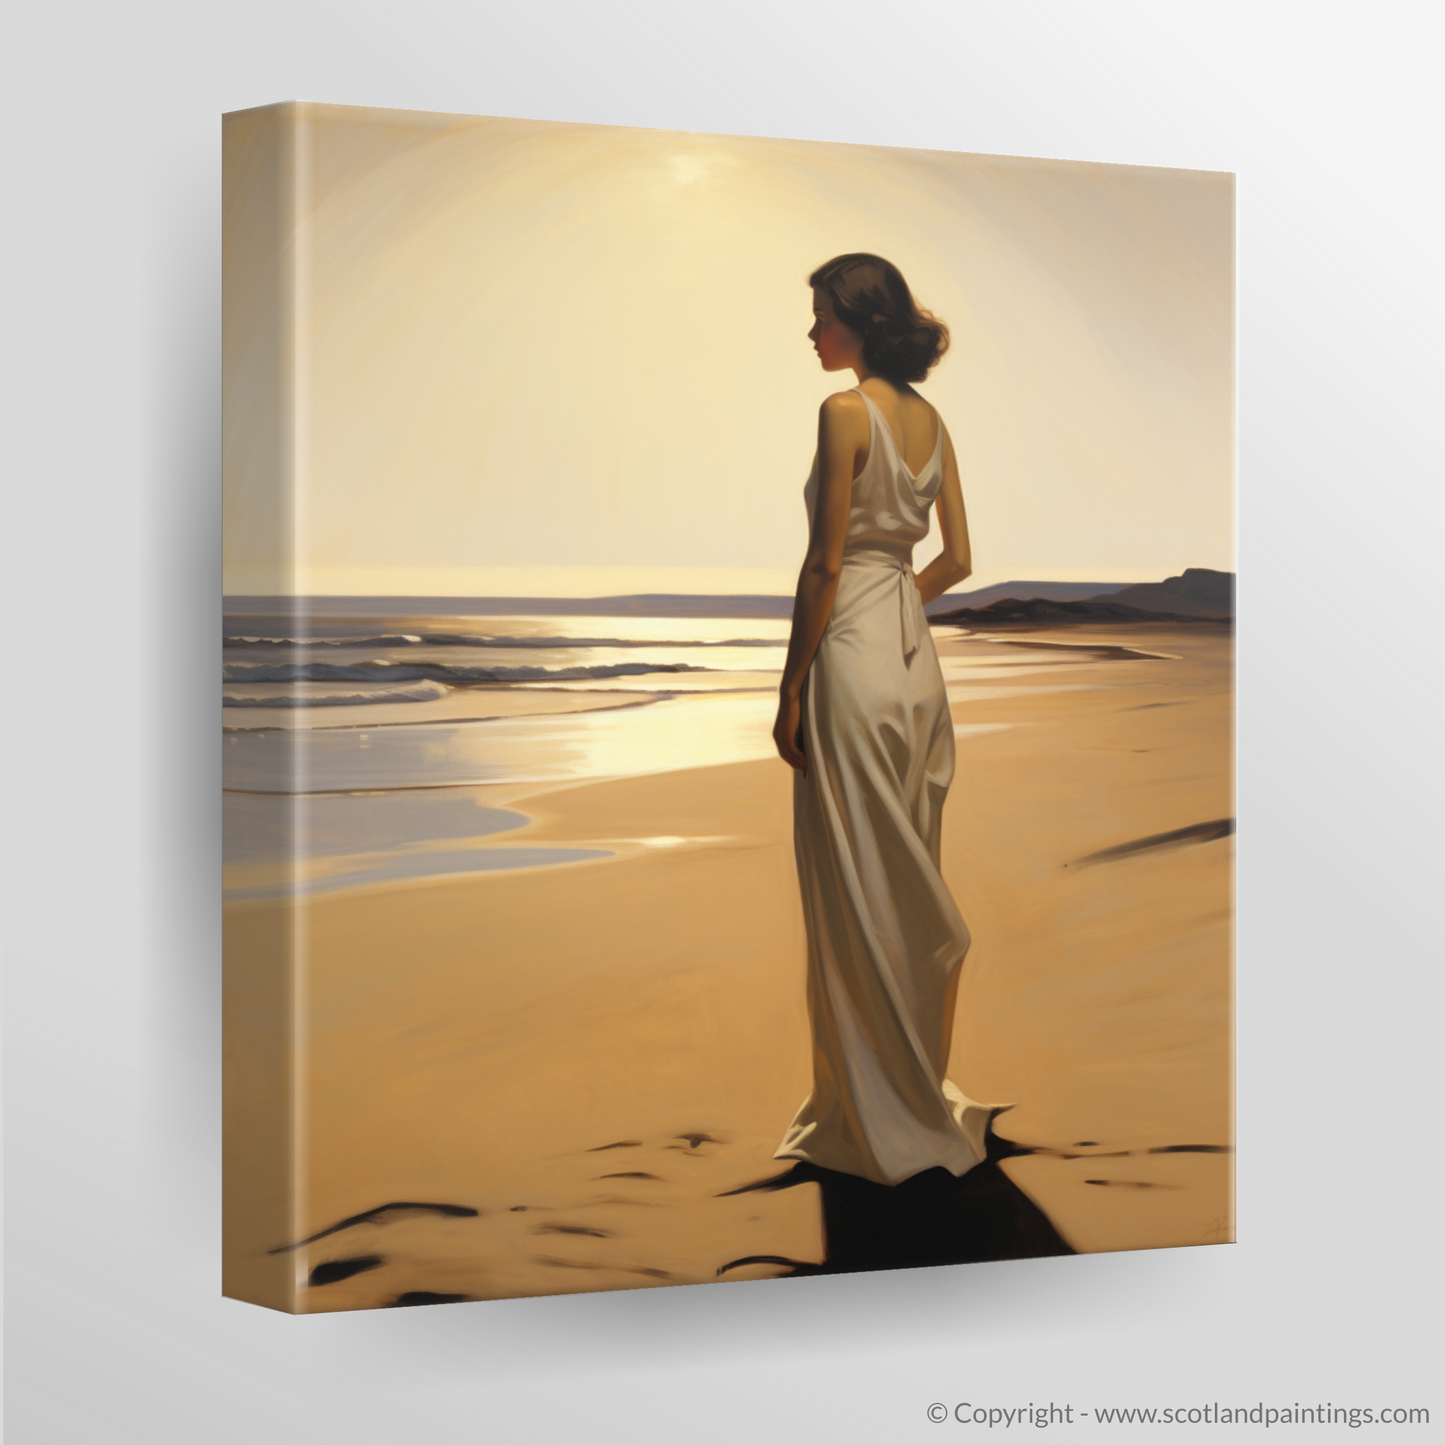 Solitude by the Sea: A Woman's Contemplative Gaze in Troon